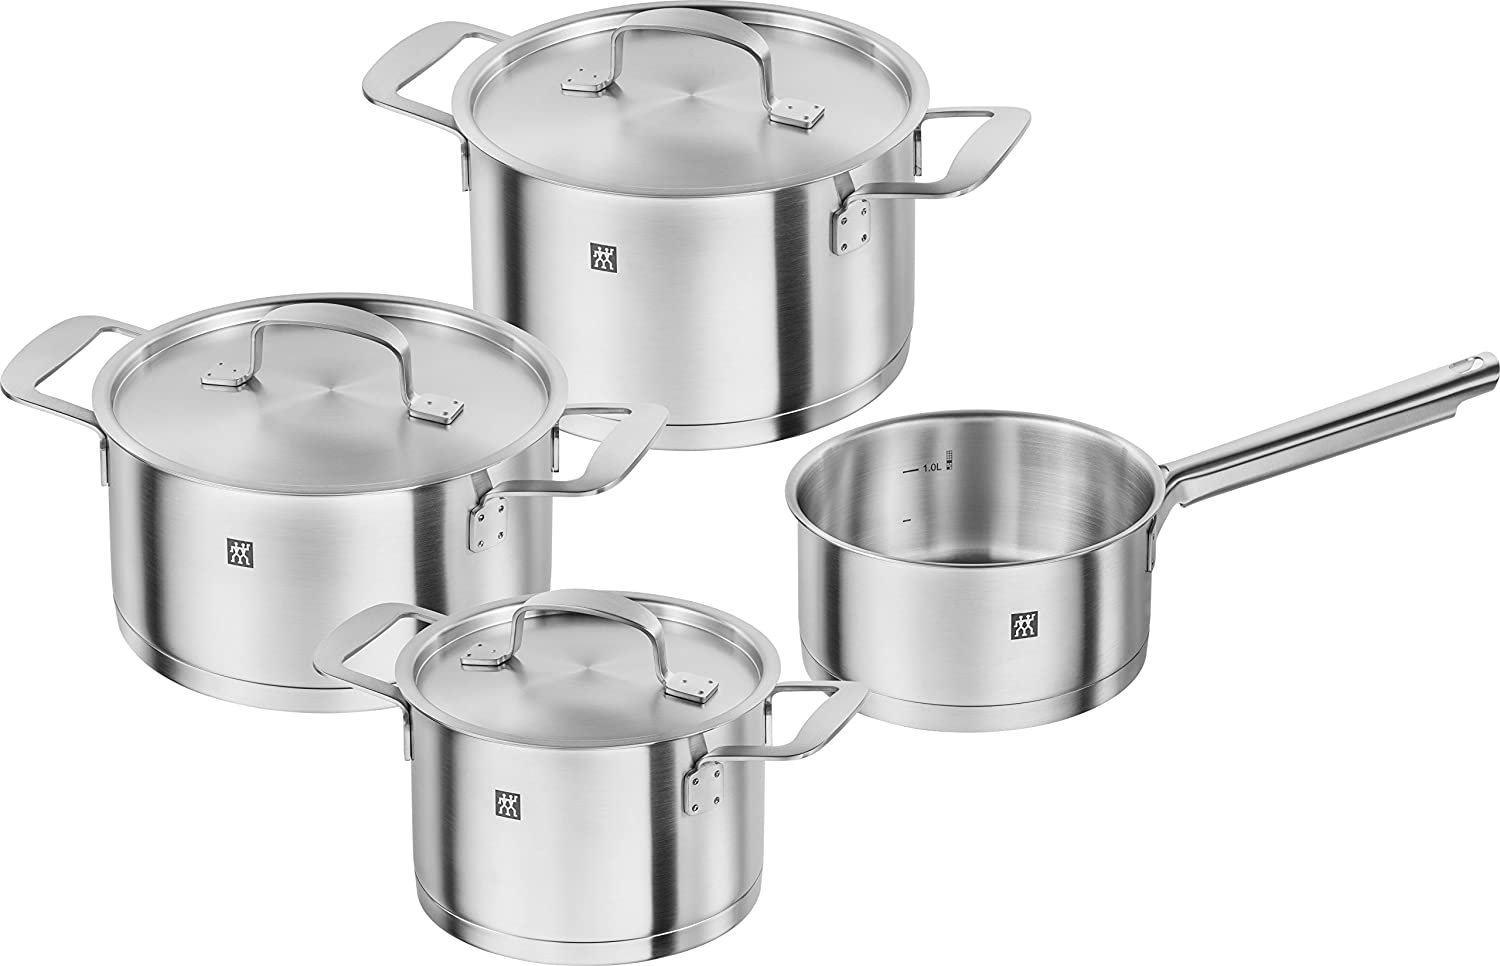 Zwilling Cookware Set, 4 Pieces, Stainless Steel, Silver, 520 cm